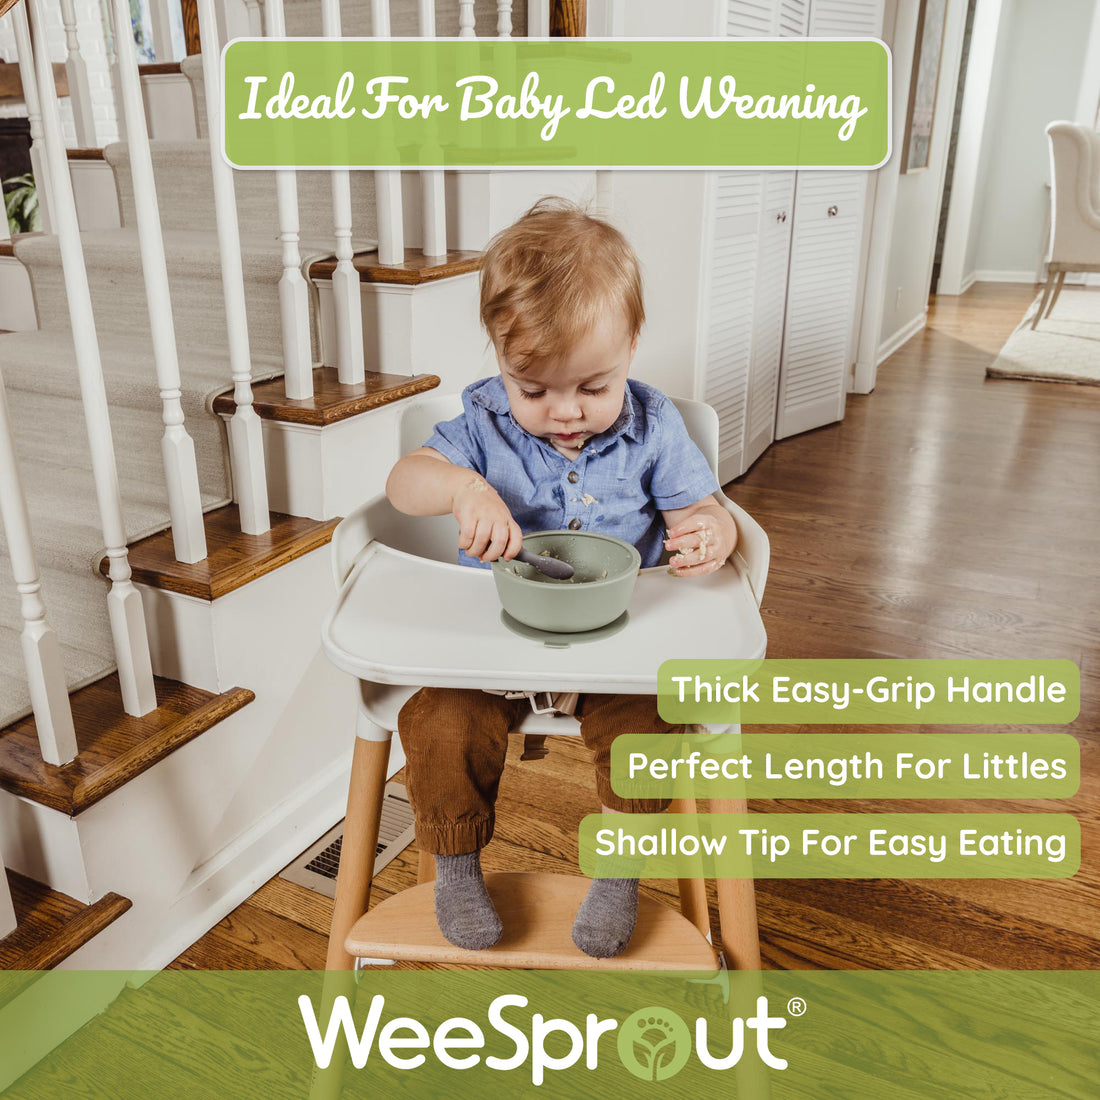 WeeSprout Toddler Utensils, 3 Forks & 3 Spoons, 18/8 Stainless Steel & Food  Grade Silicone, Thick Easy-Grip Handles, Perfect Length For New Self